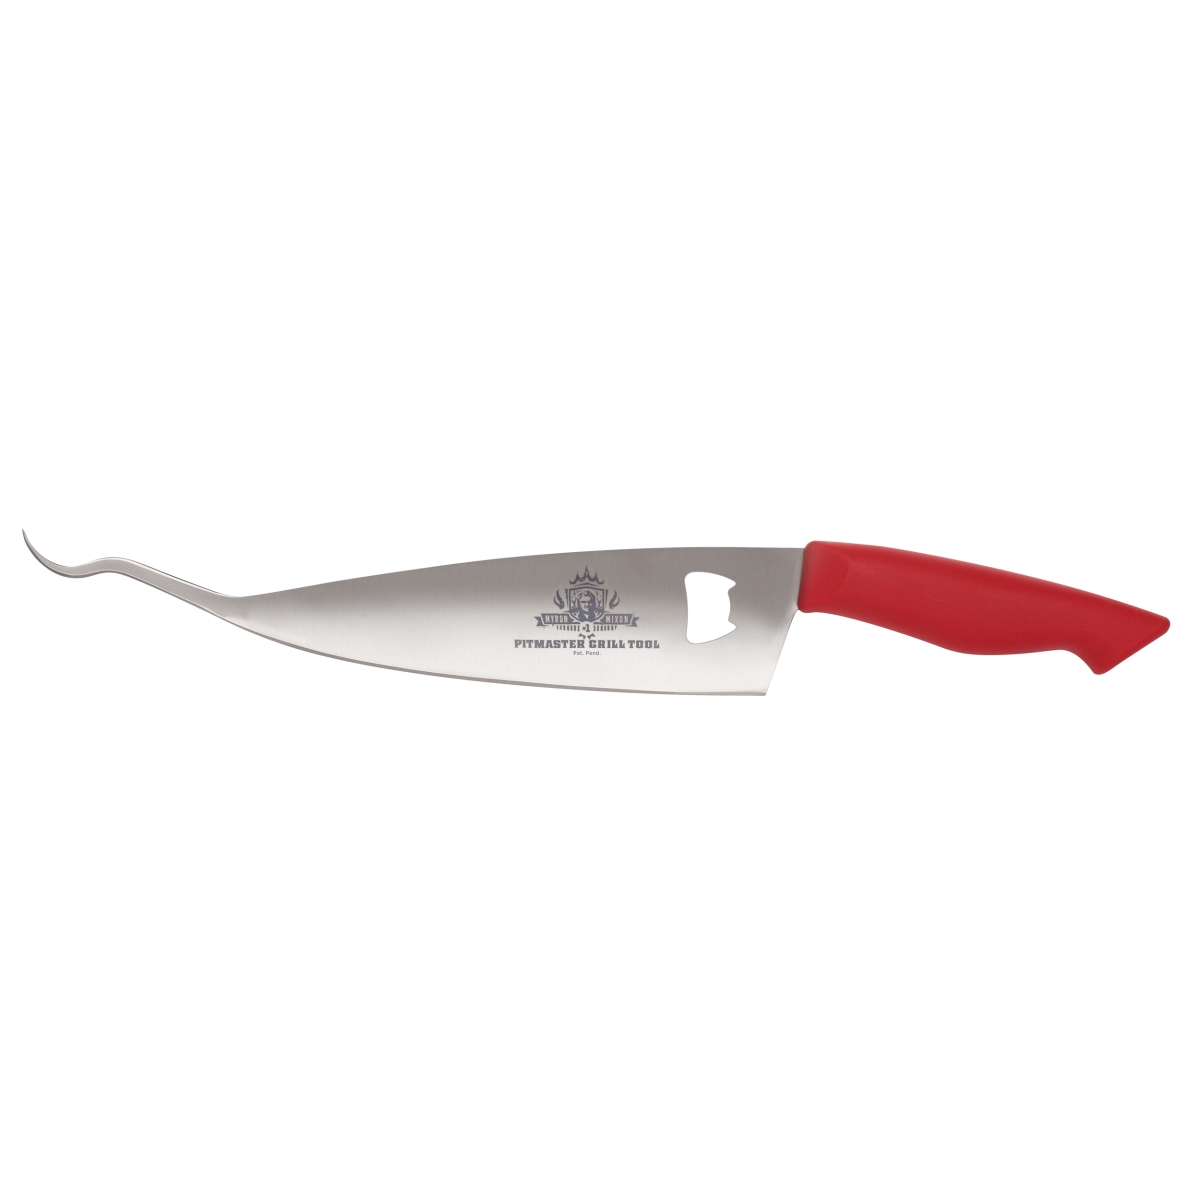 7008 Pitmaster Grill Tool